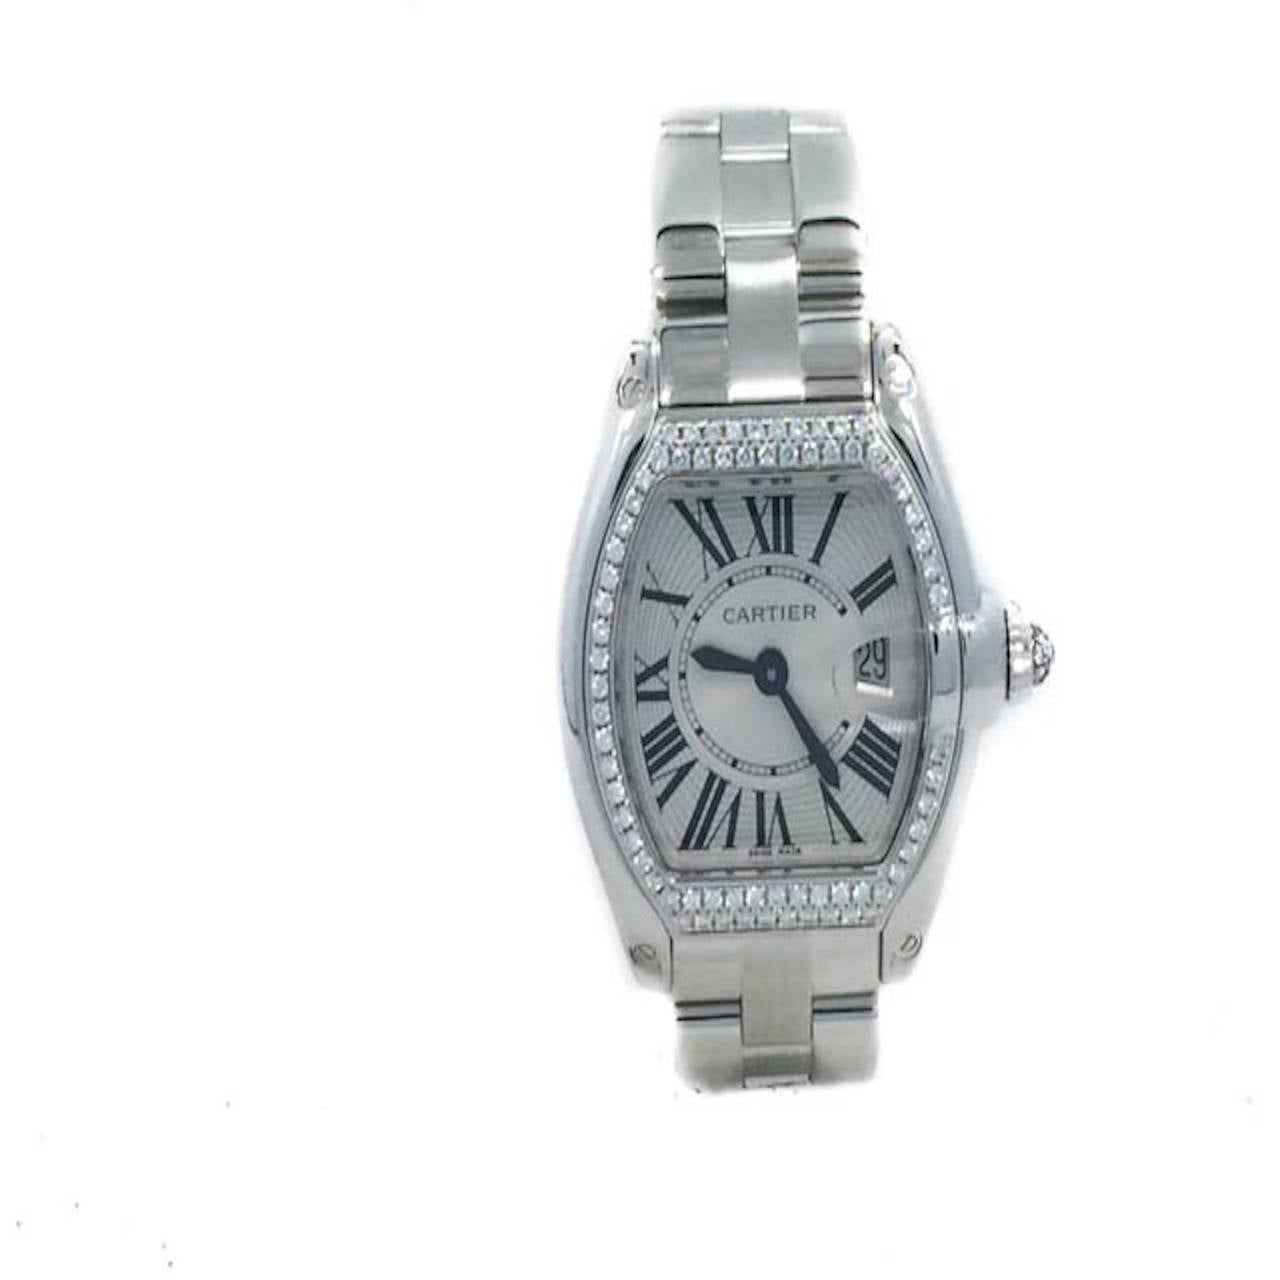 Ladies (30mm) Cartier Roadster 18k White Gold Watch W/ Factory Diamond Bezel On 18k Bracelet , Ref WE5002X2. The Watch is in Excellent Condition and is Working Perfectly, Movement is Battery Operated. Included with the Watch are also 18k White Gold